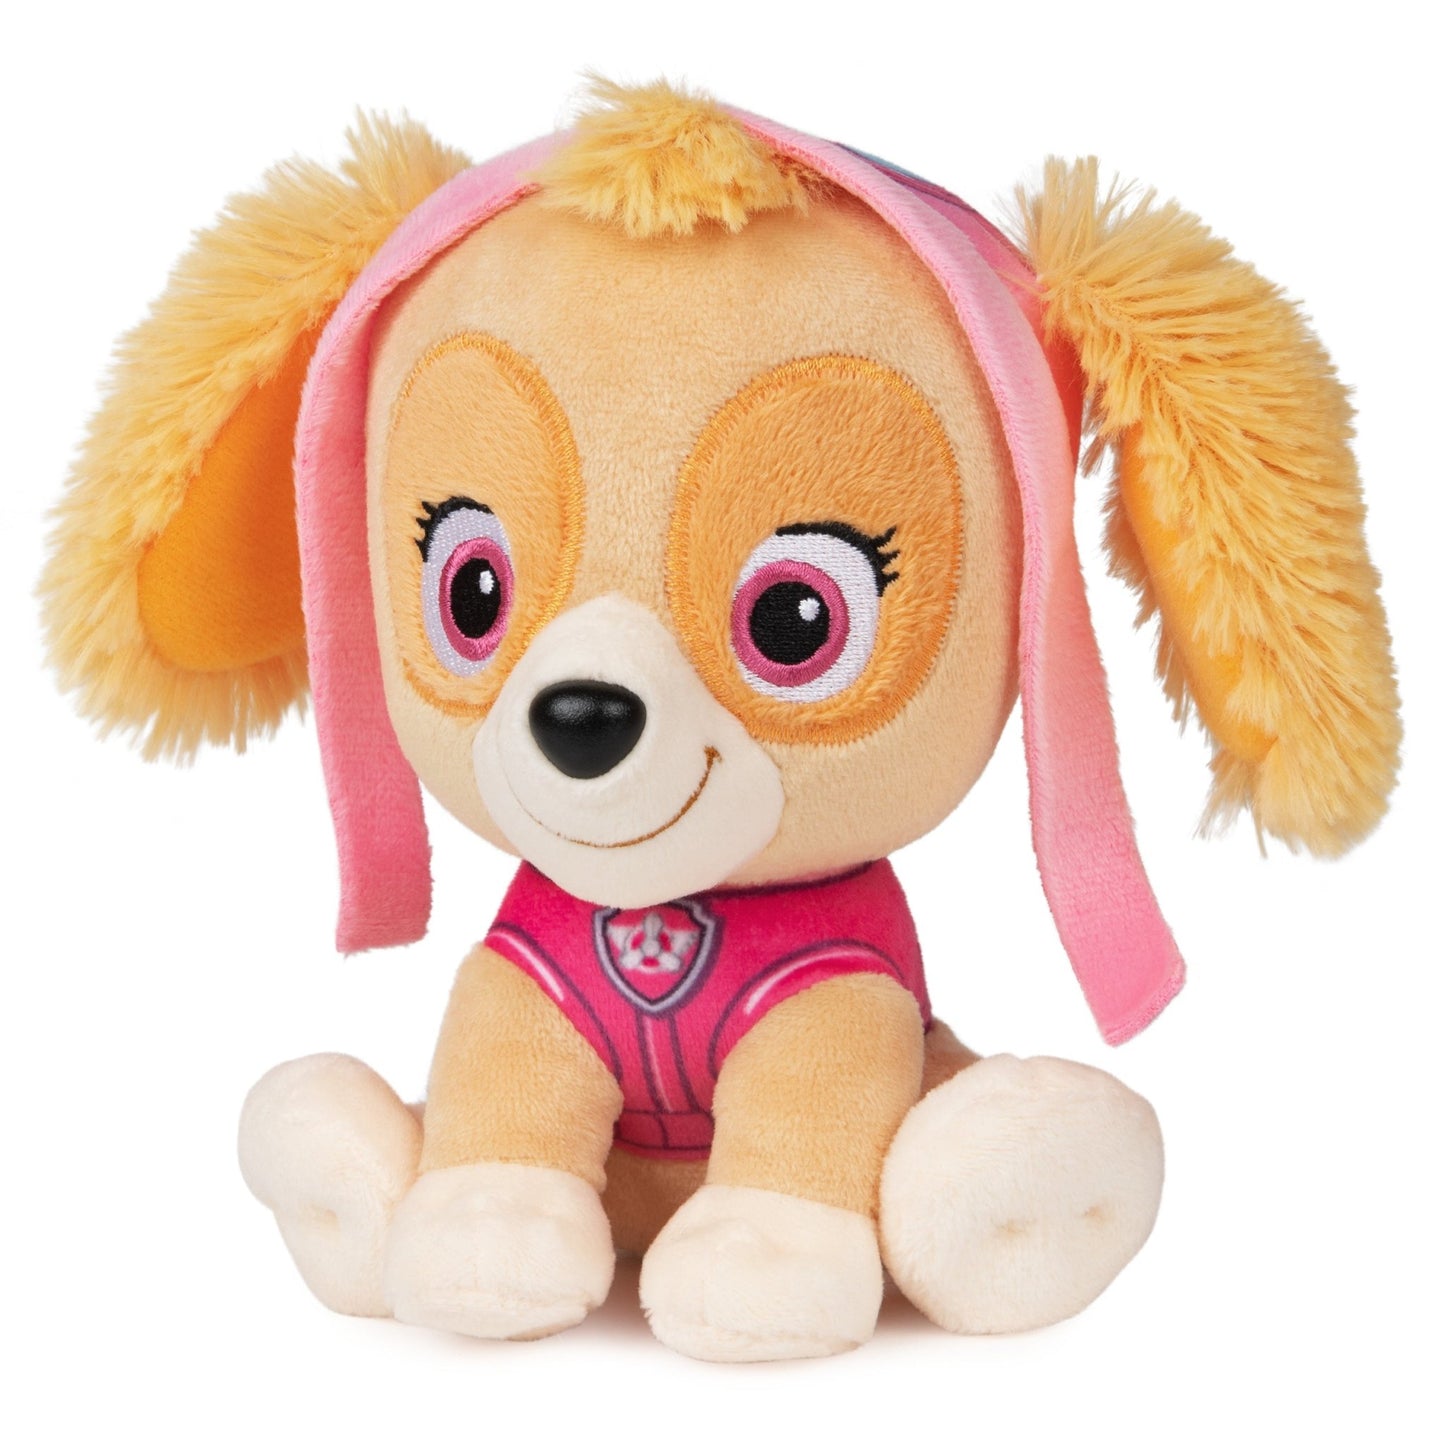 GUND Official PAW Patrol Skye in Signature Aviator Pilot Uniform Plush Toy, Stuffed Animal for Ages 1 and Up, 6" - Paramount Shop